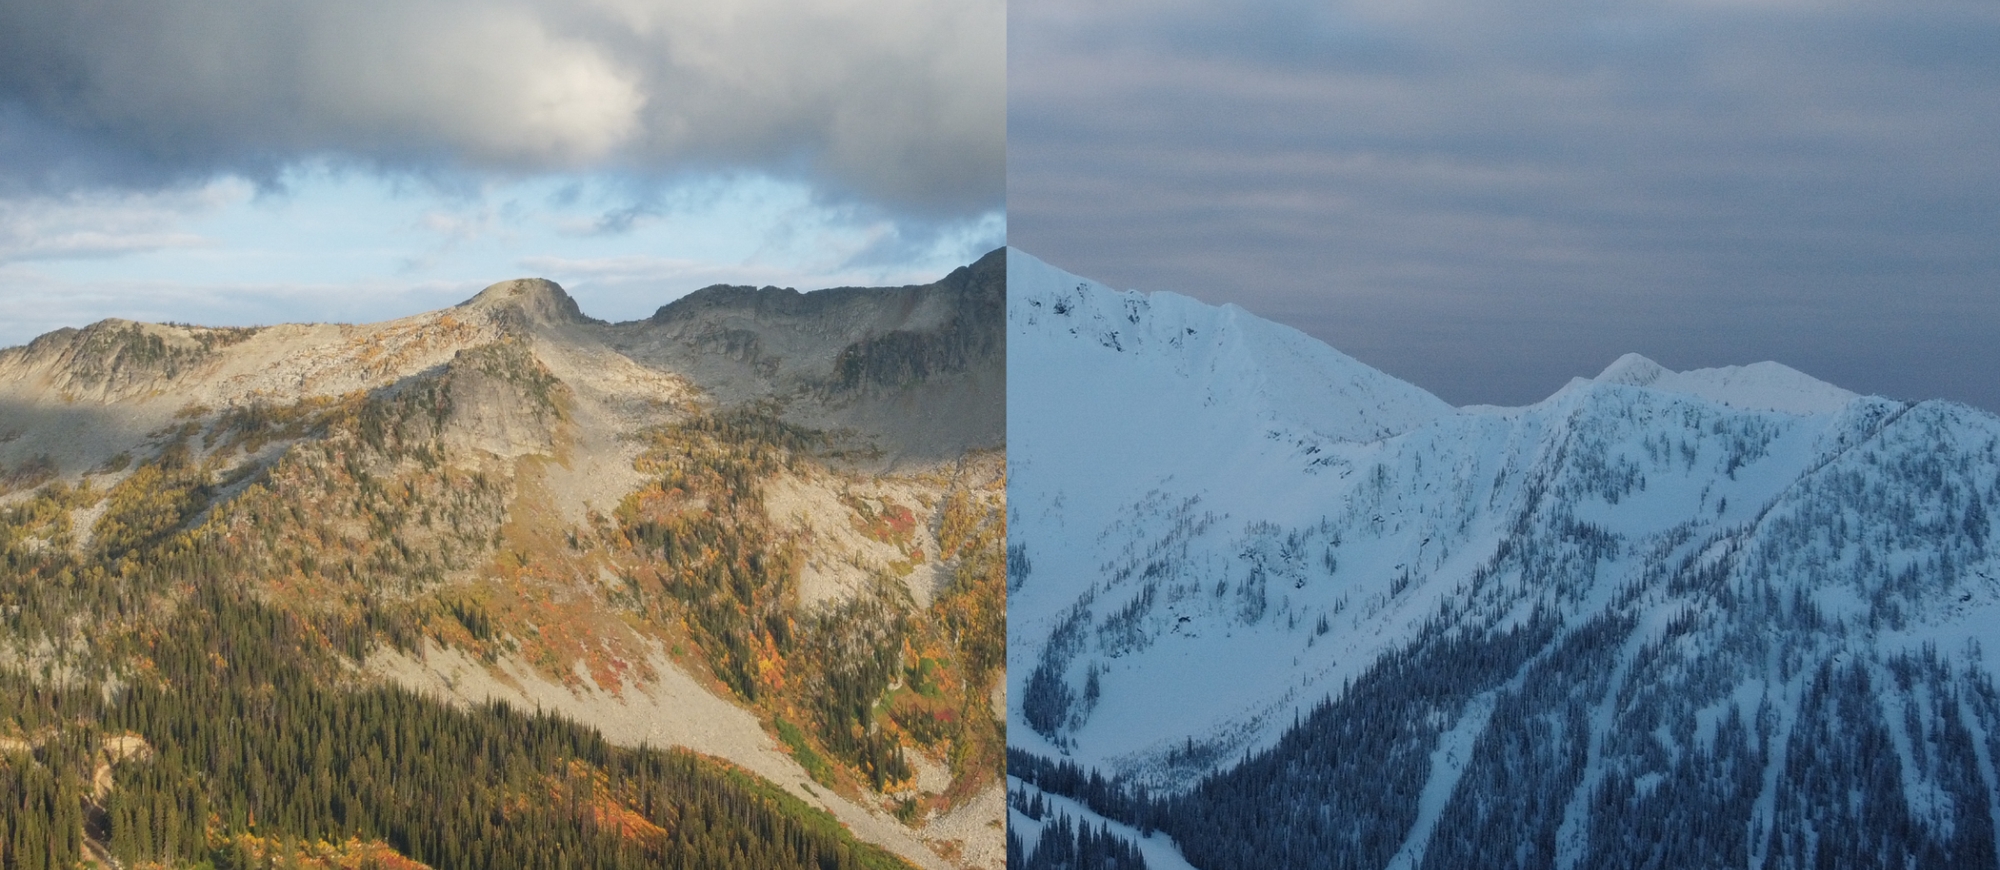 Mountain landscape in summer and winter.